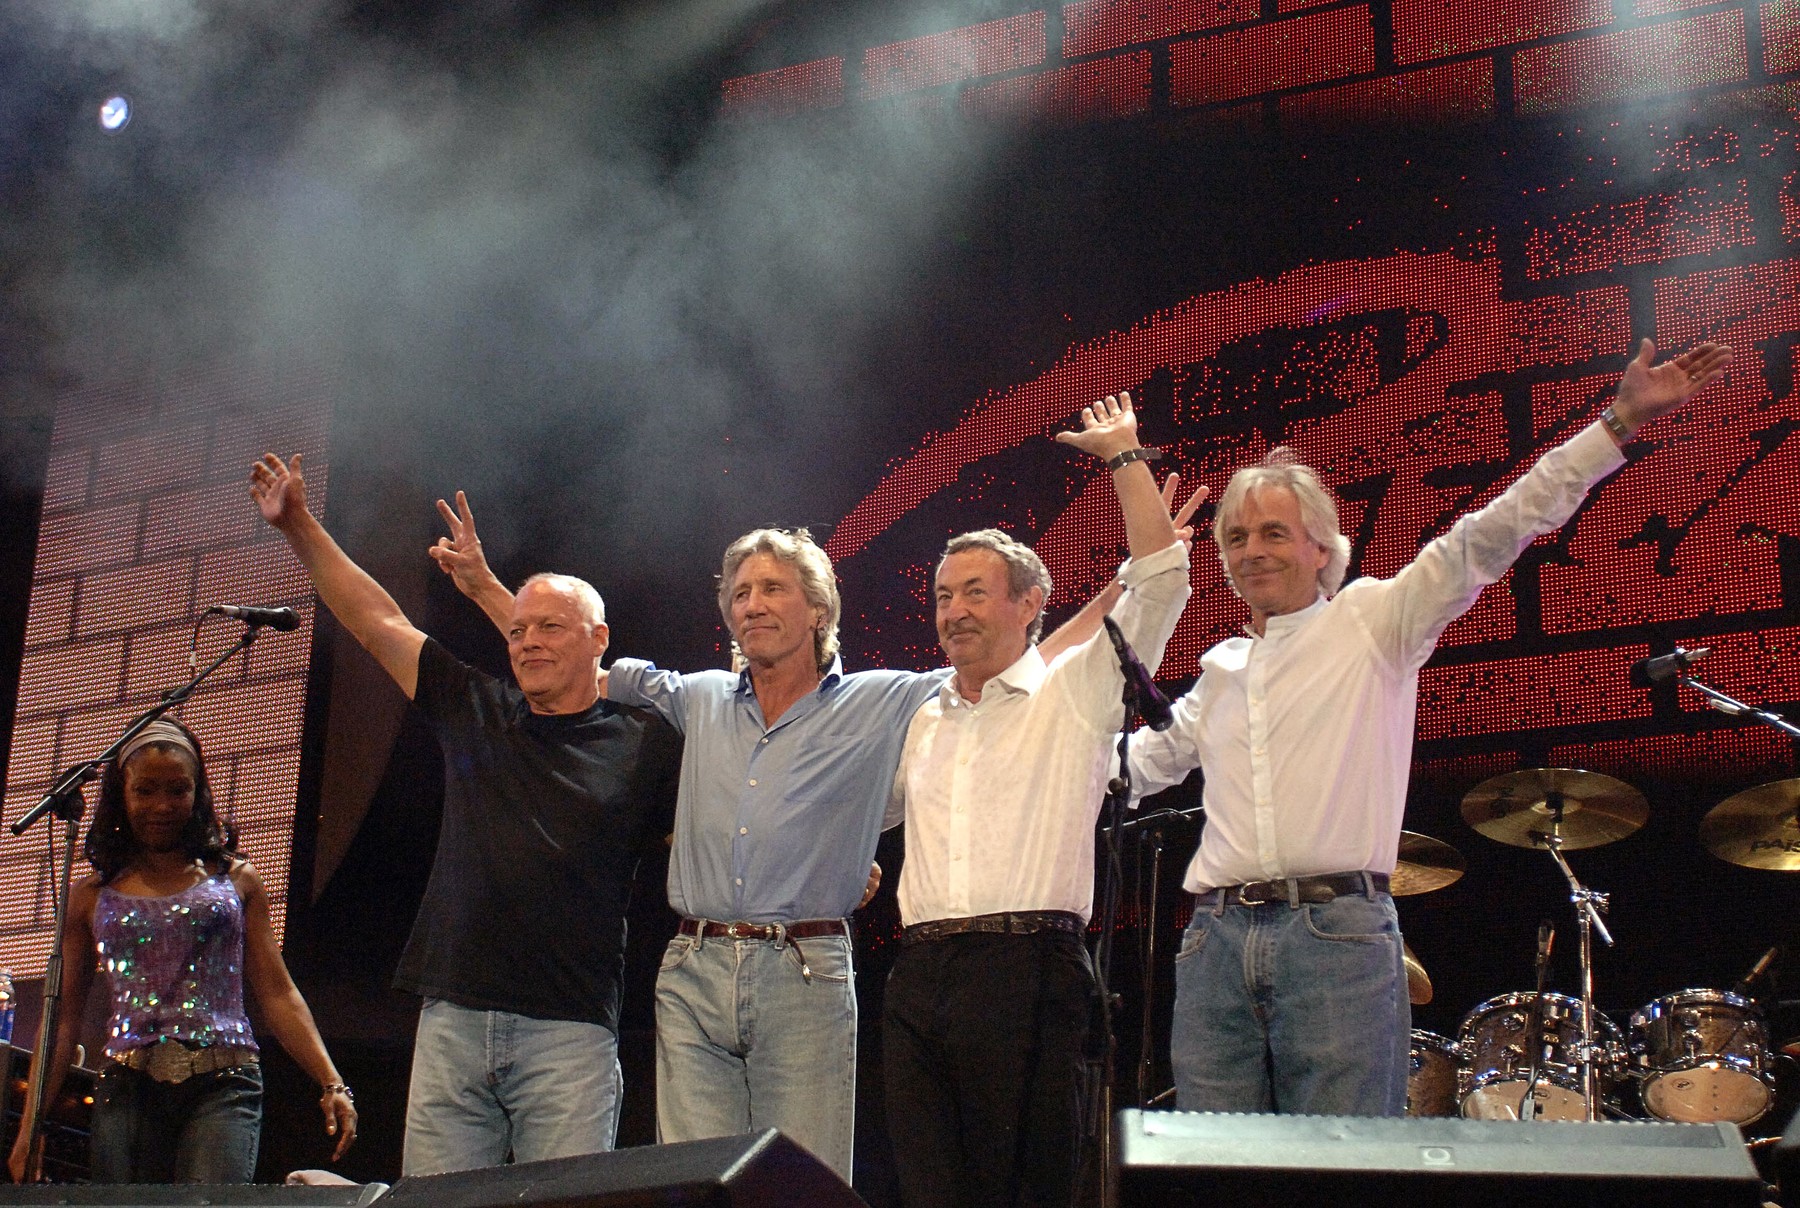 (FILES) Photo dated on July 02, 2005 shows British rock band Pink Floyd (l-r David Gilmour, Roger Waters, Nick Mason and Richard Wright) taking a bow at the Live 8 concert in Hyde Park, London 02 July 2005. Pink Floyd founding member and keyboard player Richard Wright died Monday at the age of 65 after battling cancer, his spokesman said.
AFP PHOTO John D Mc Hugh,Image: 27126736, License: Rights-managed, Restrictions: , Model Release: no, Credit line: JOHN D MCHUGH / AFP / Profimedia